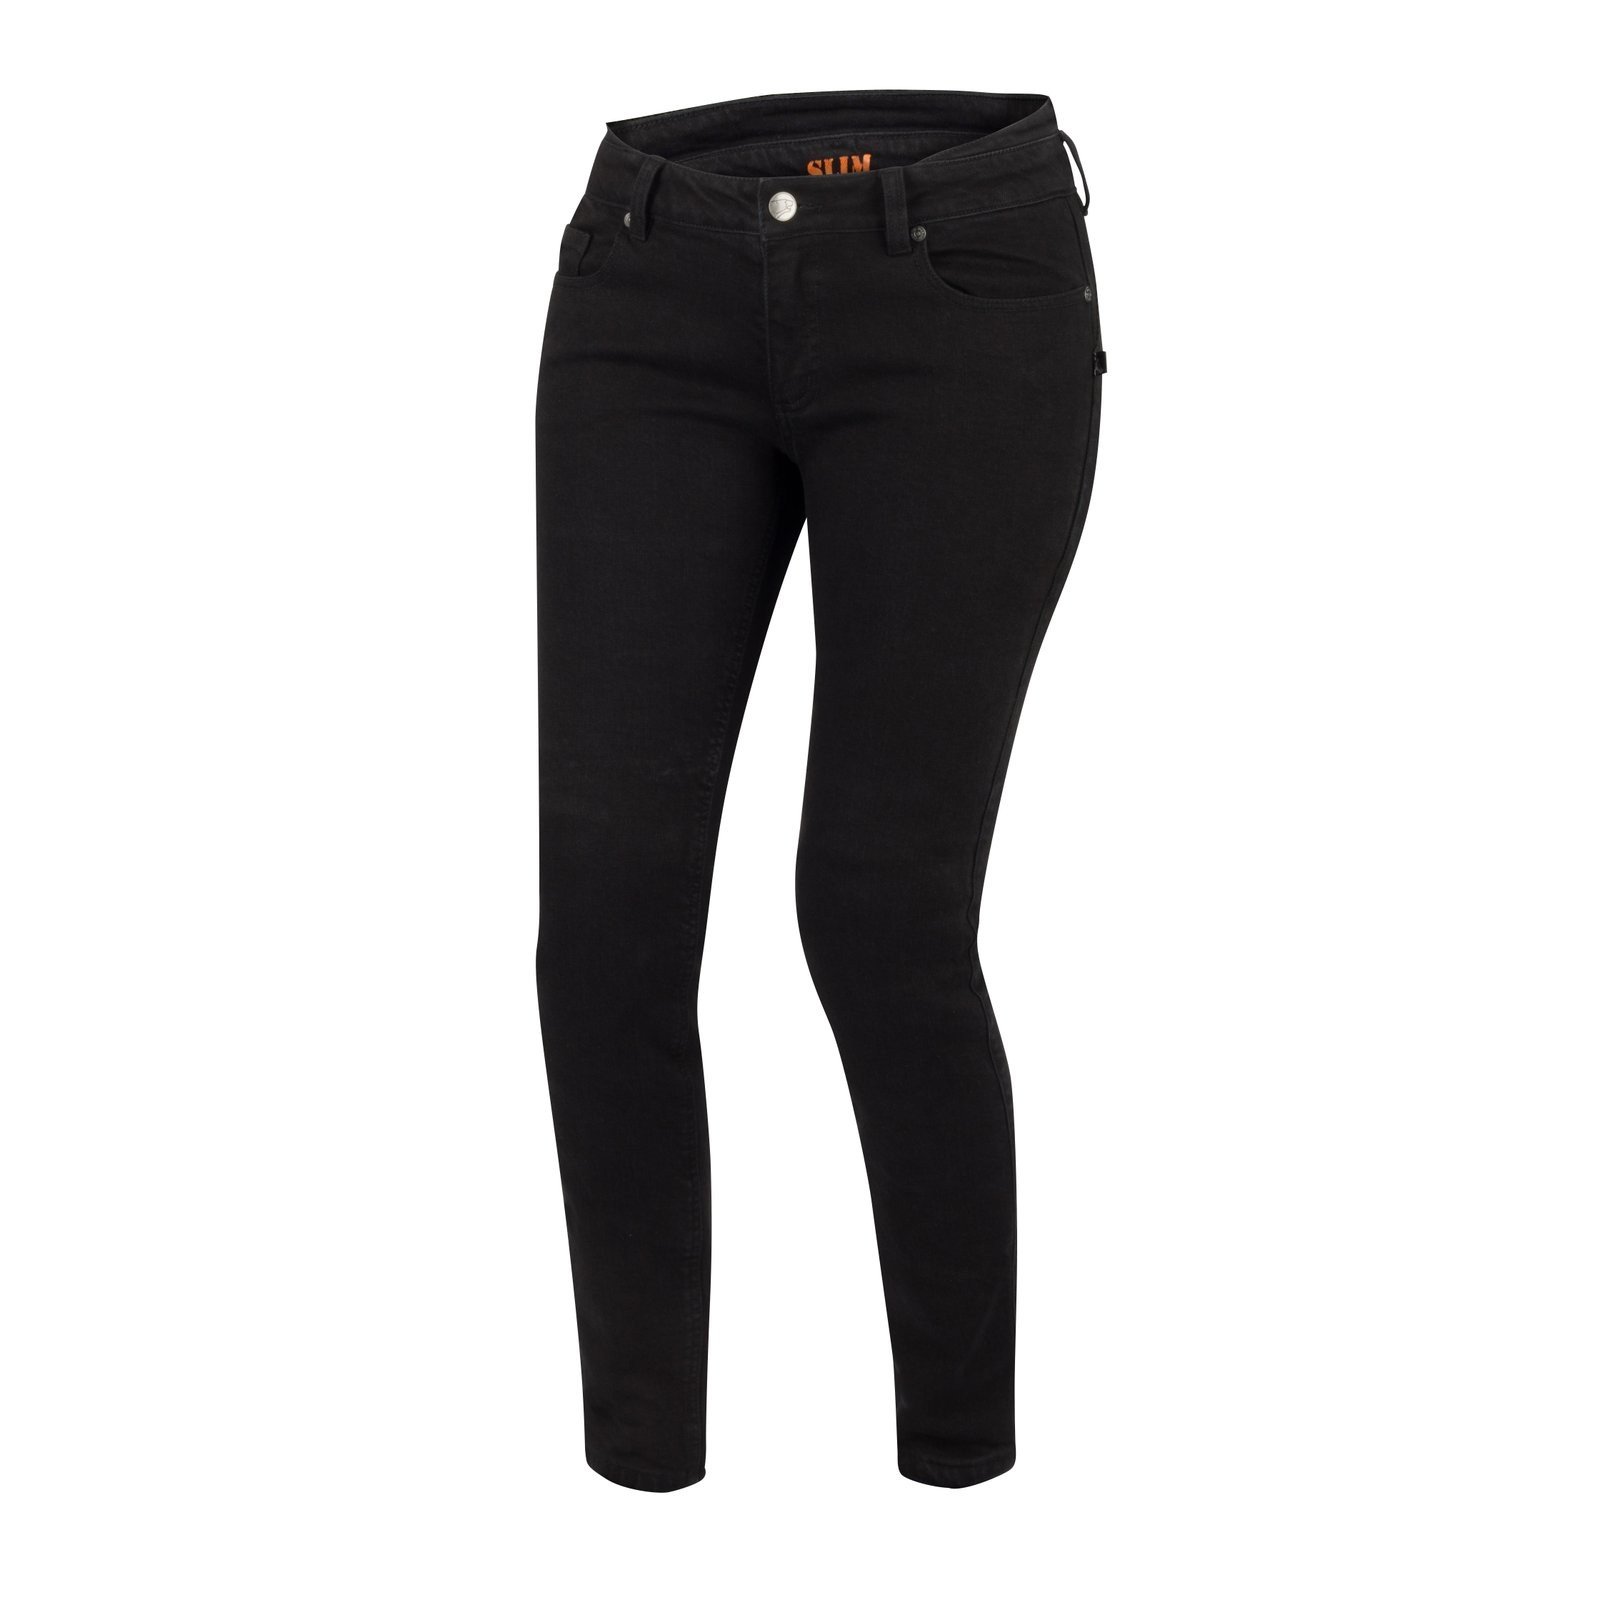 Image of Bering Patricia Lady Black Pants Size T3 ID 3660815157183